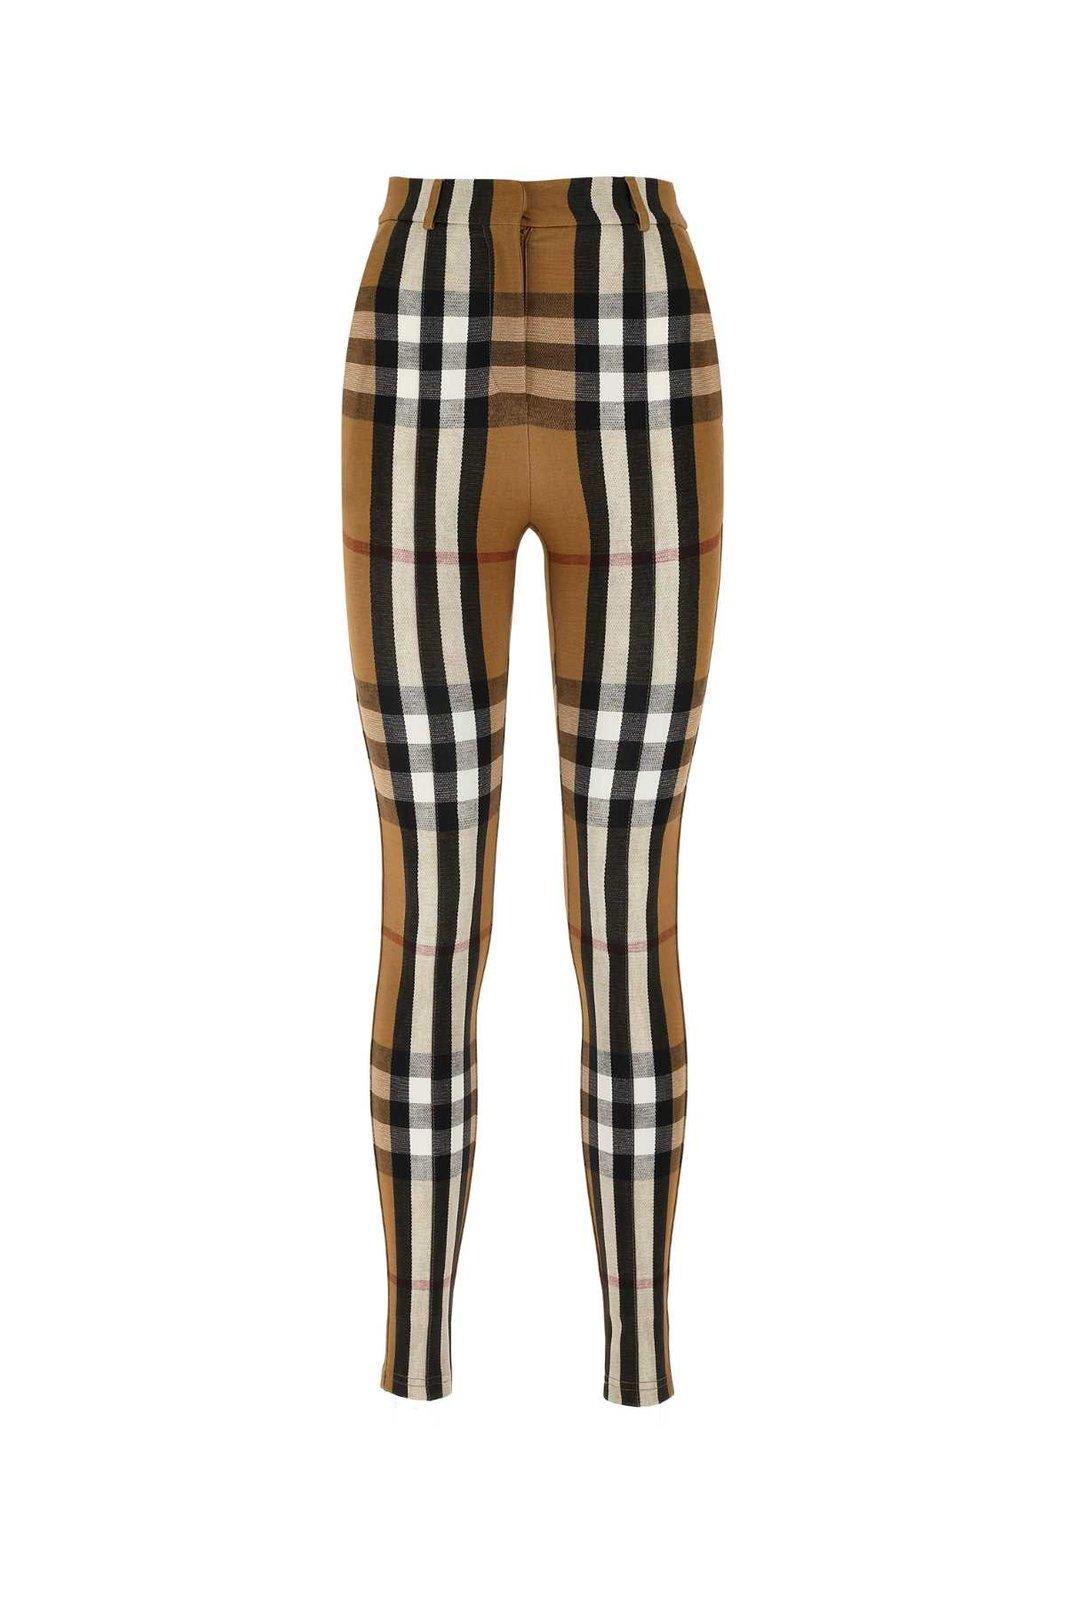 Burberry Vintage Check Slim-fit Trousers